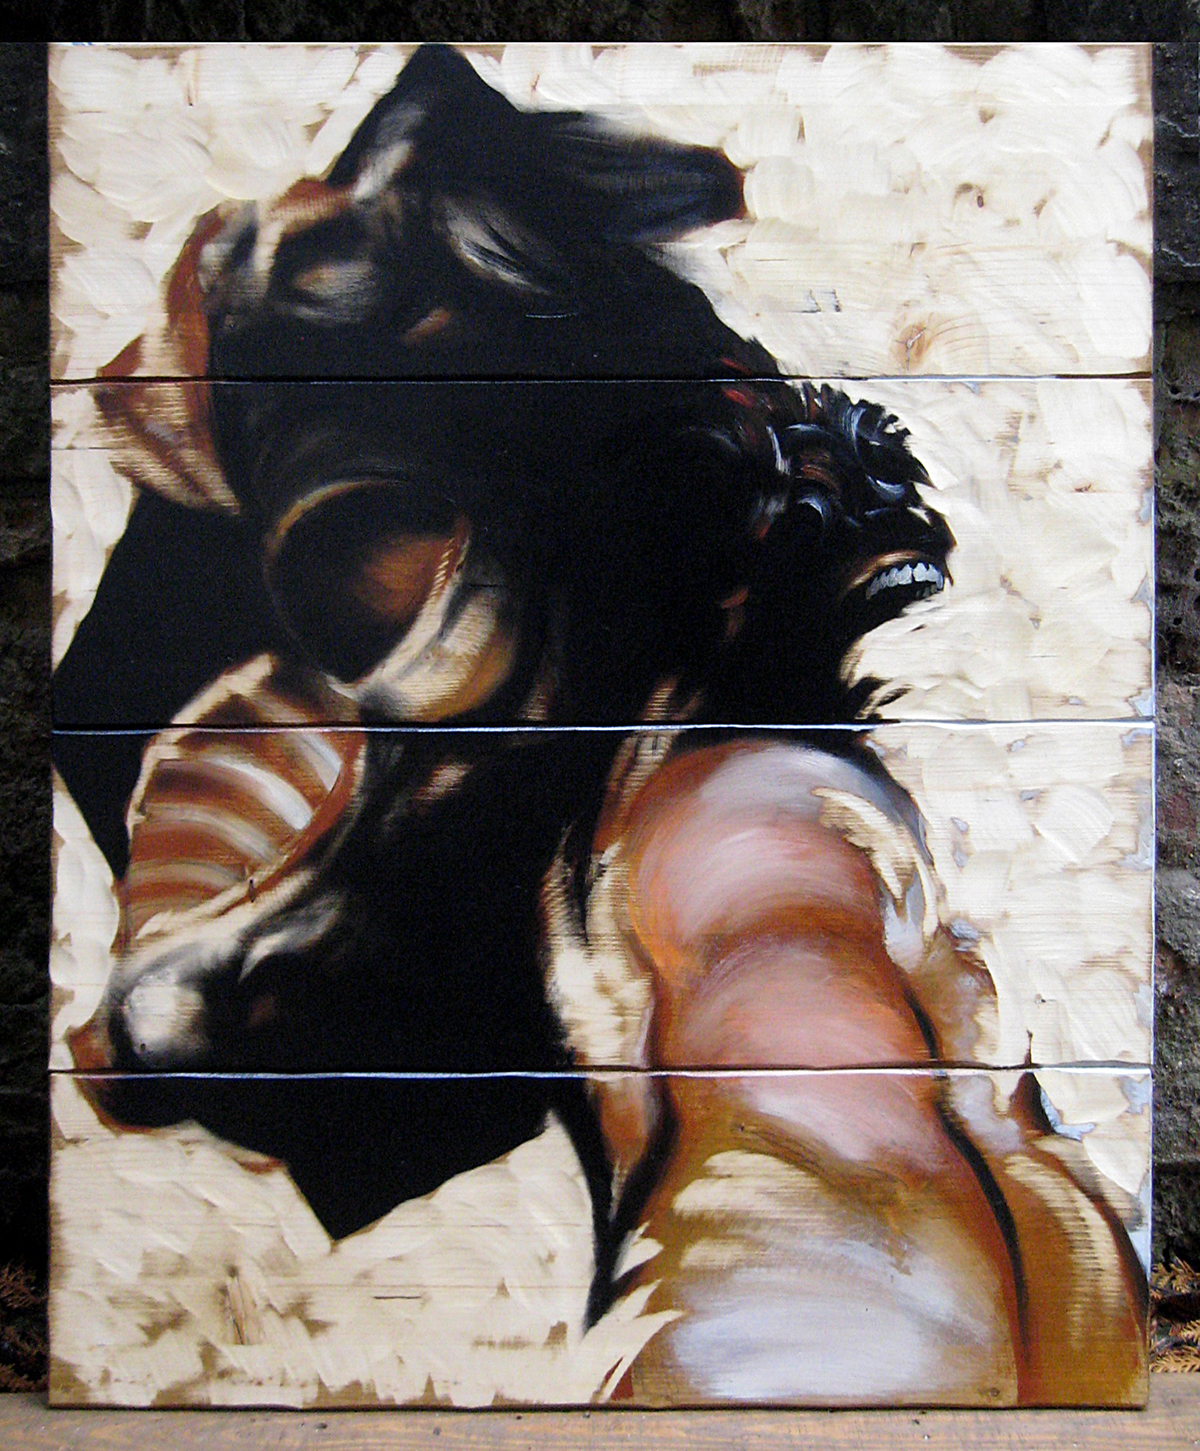 Exhibition  painting on wood